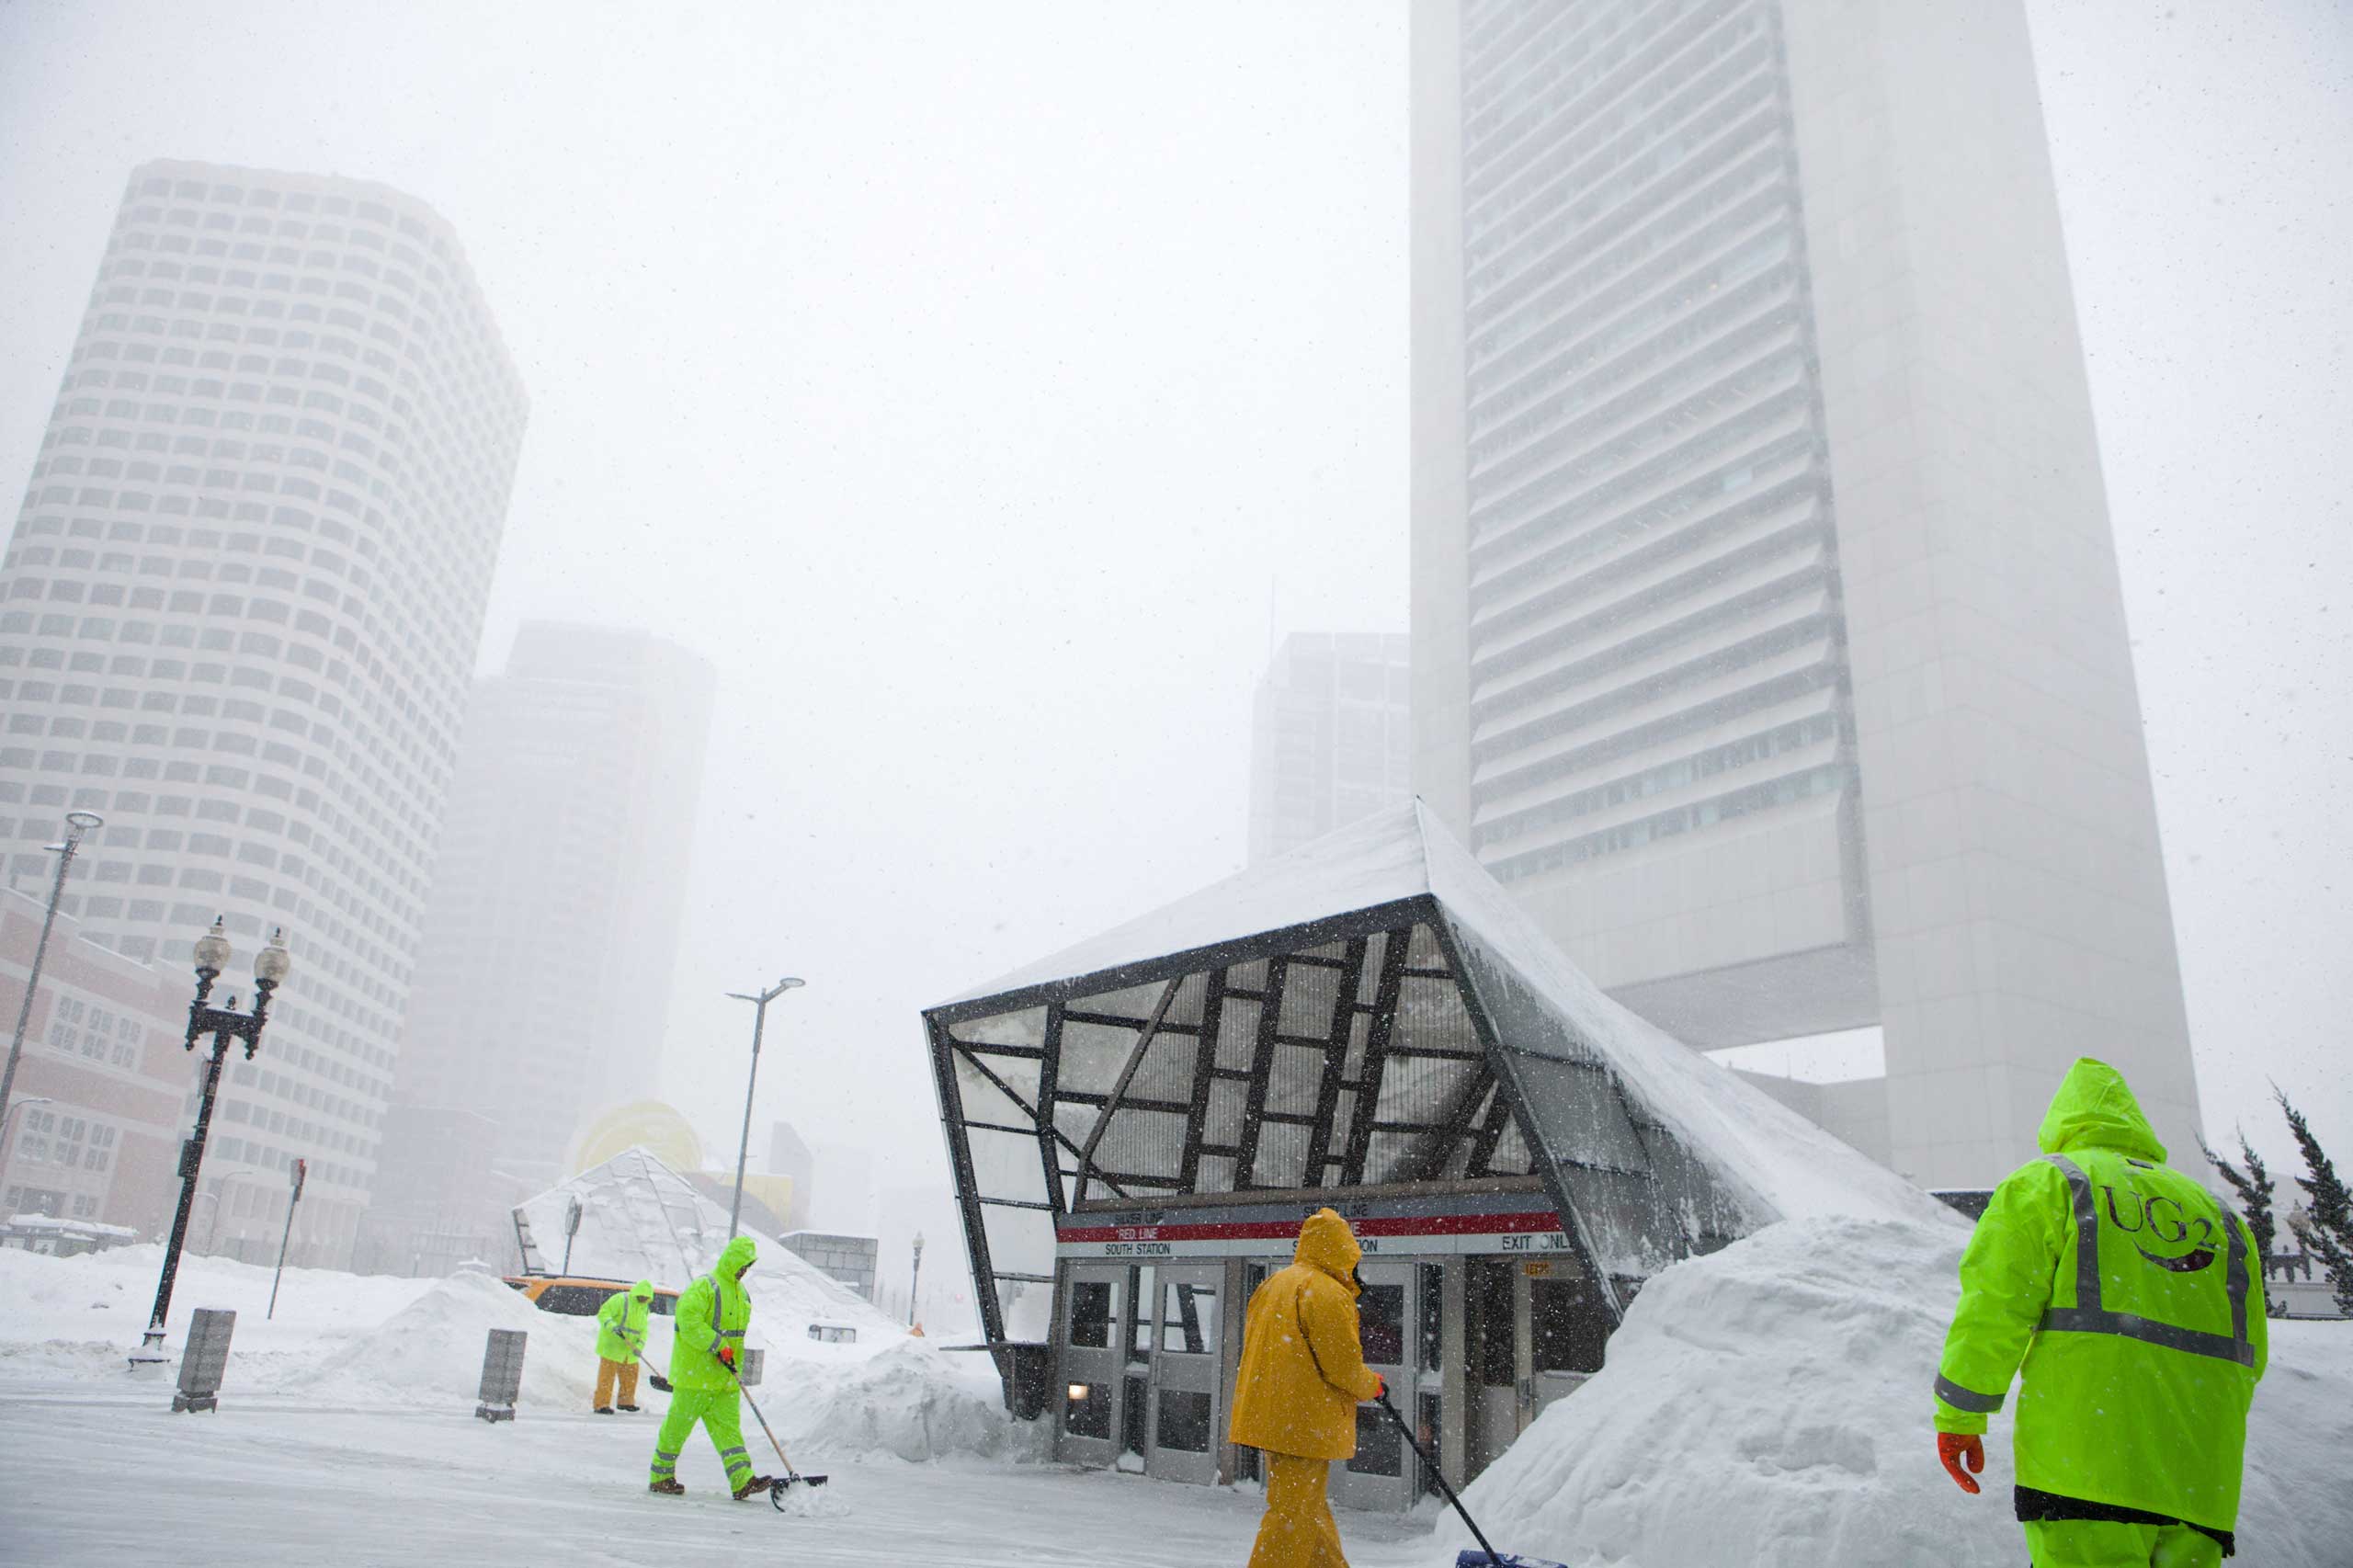 Workers clear snow around the Massachusetts Bay Transportation Authority's (MBTA) South Station in Boston on Feb. 9, 2015.